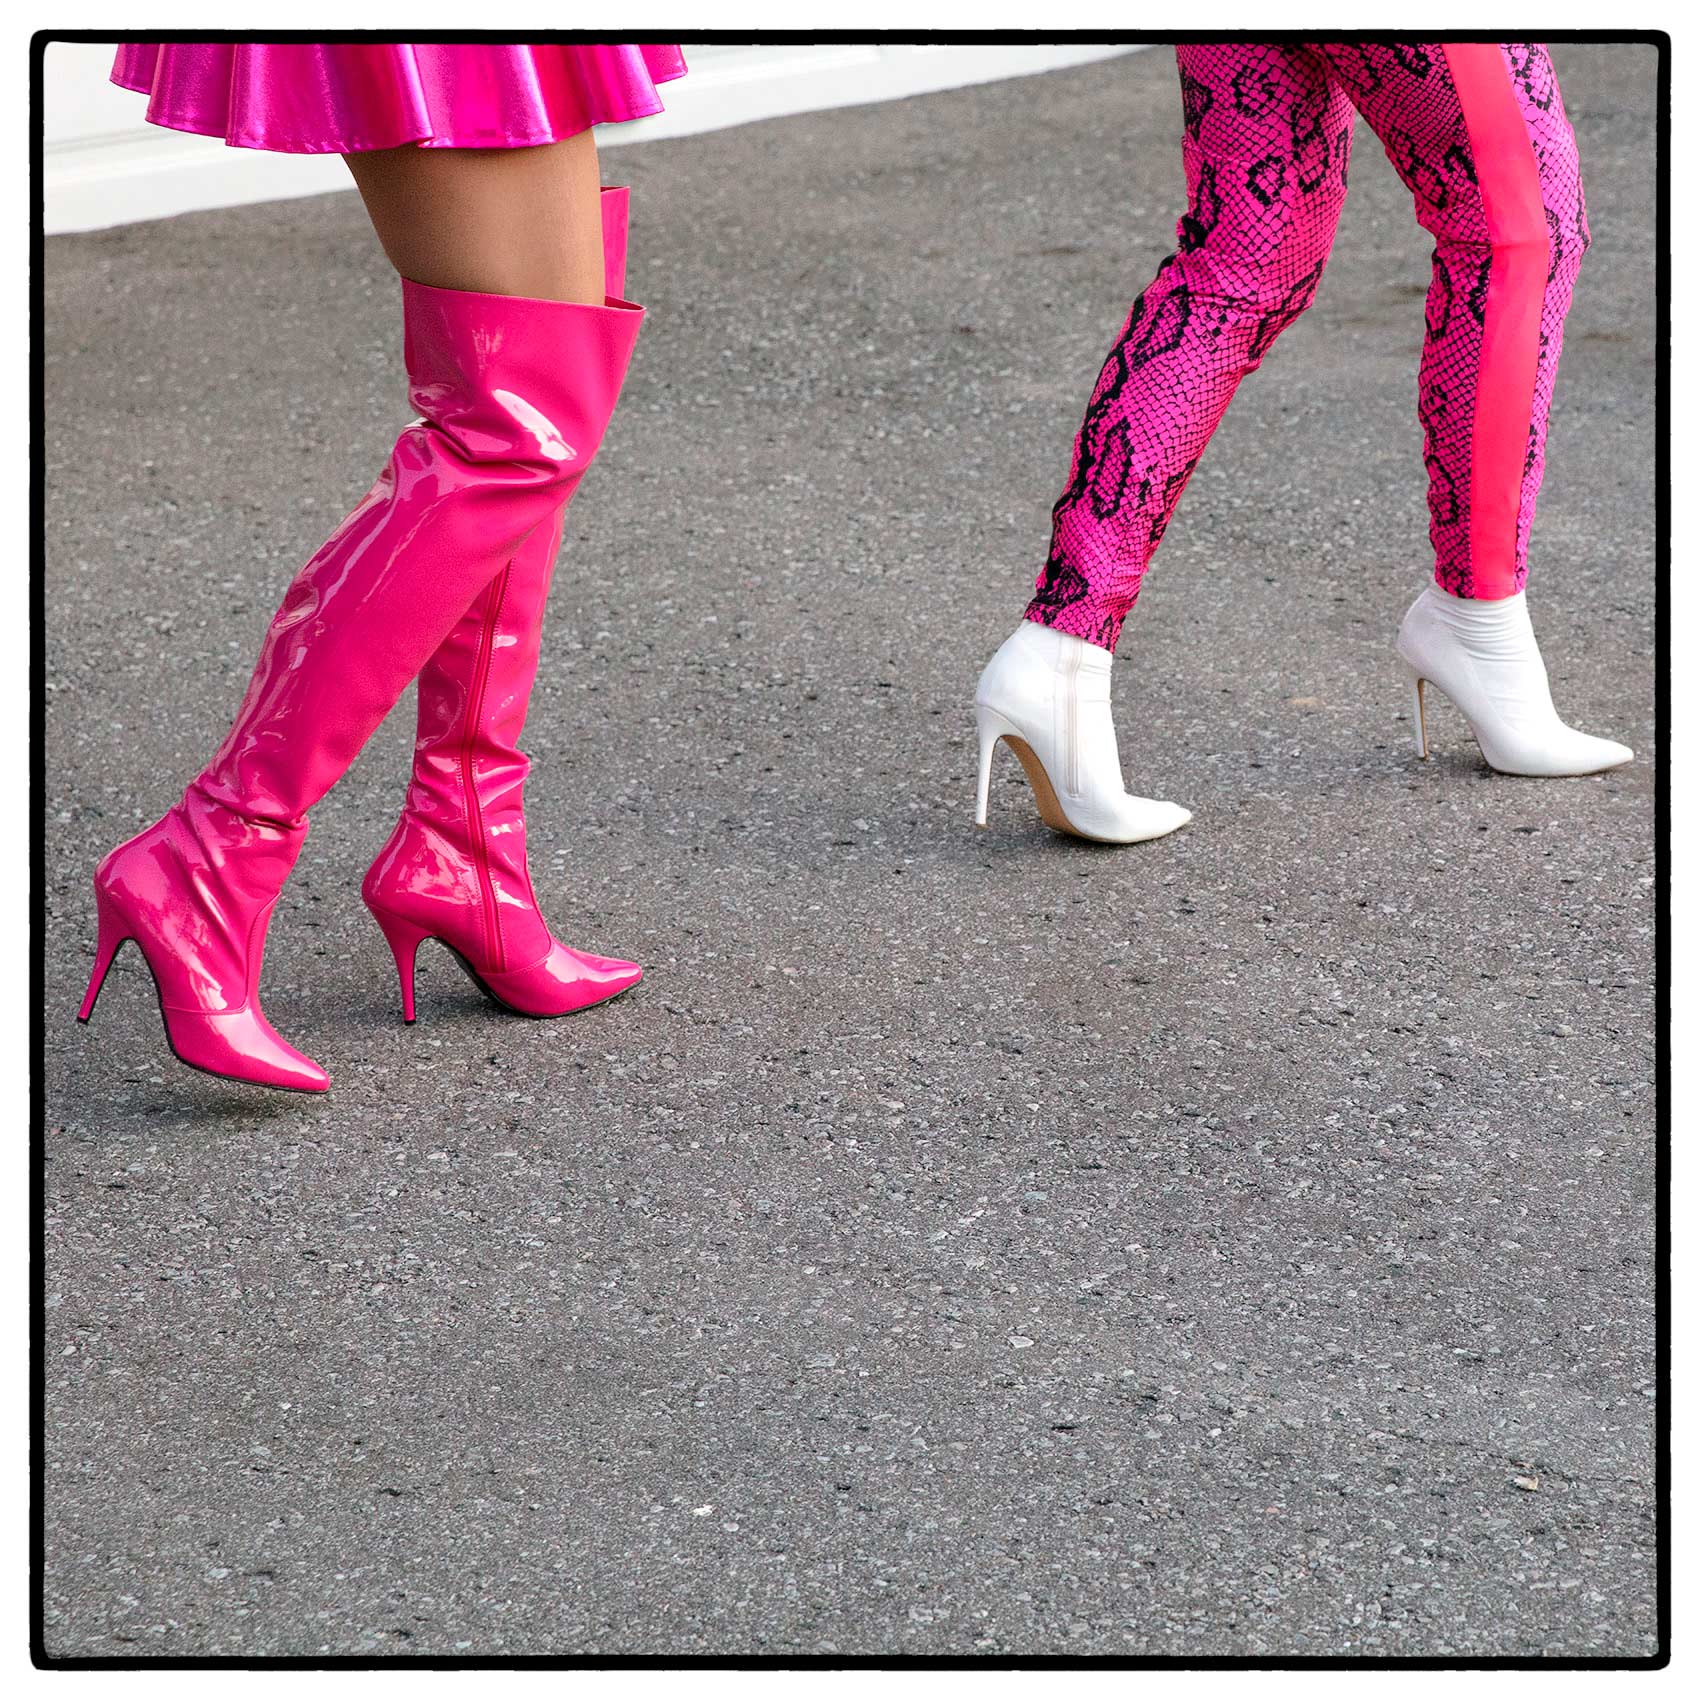 two drag queens walking in pink heels during a performance outdoors in north york